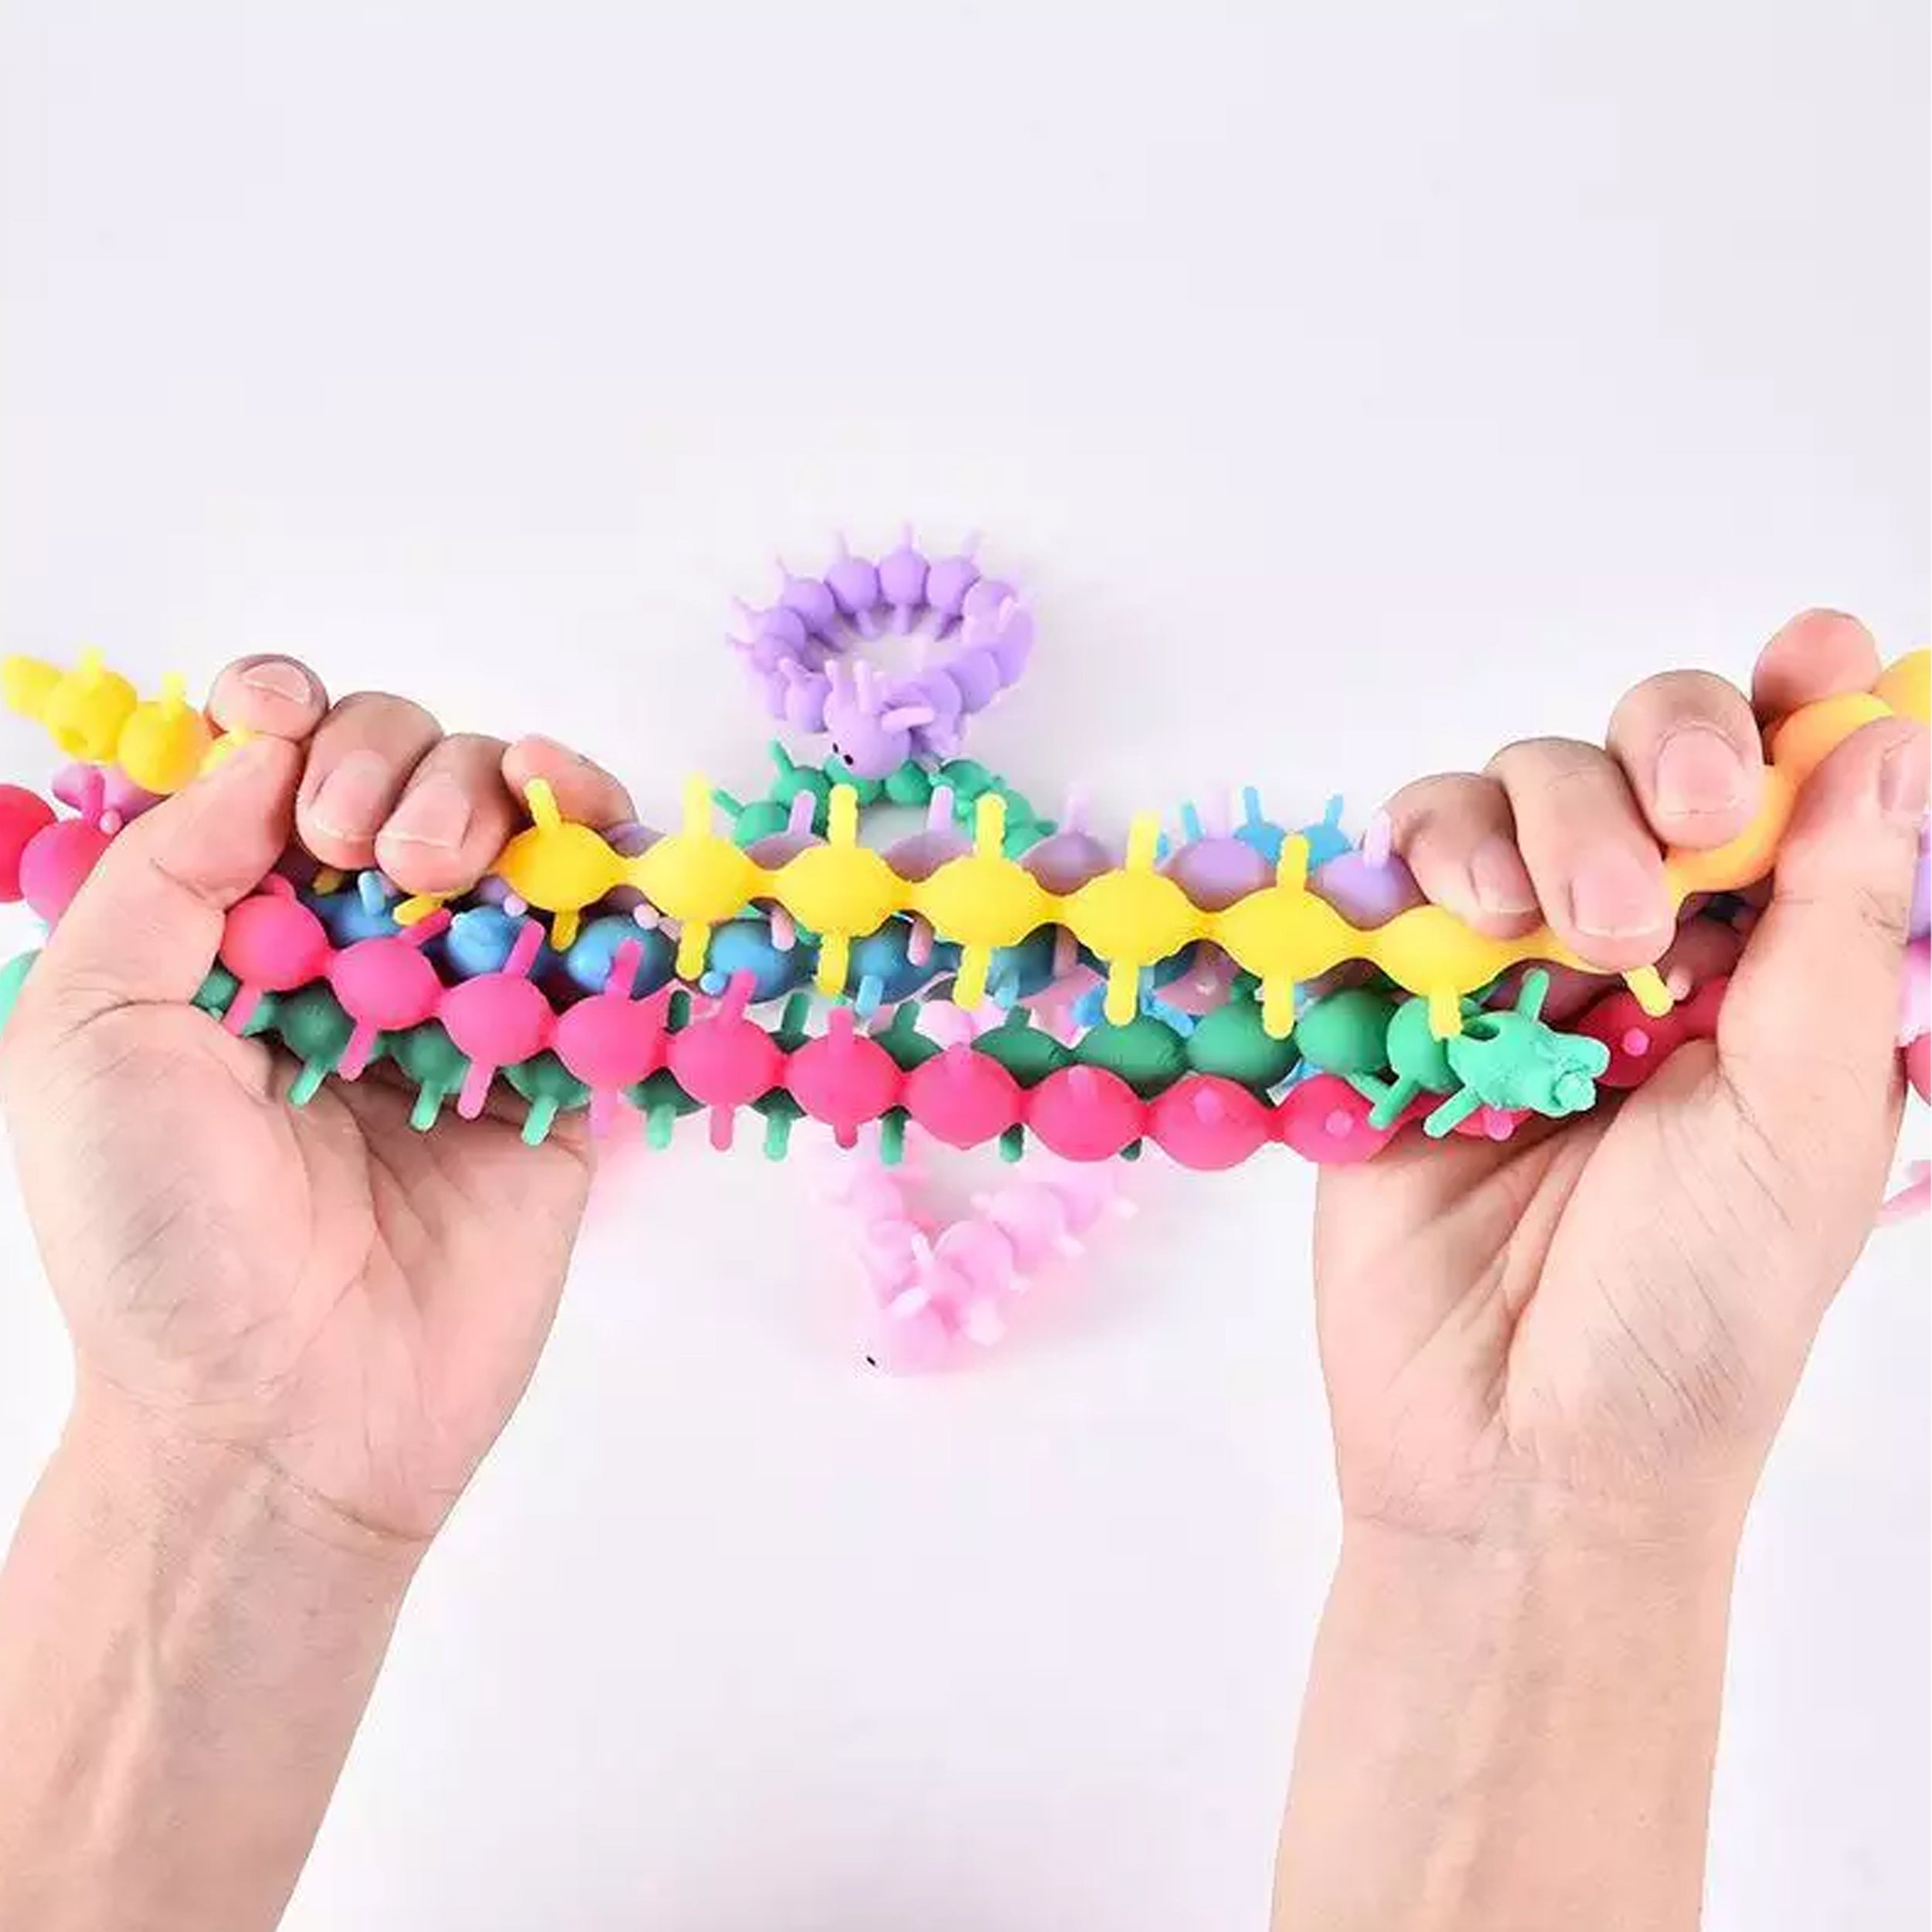 Wiggly Worm Stretchy String Fidget Toy - Perfect for Stress Relief and Focus